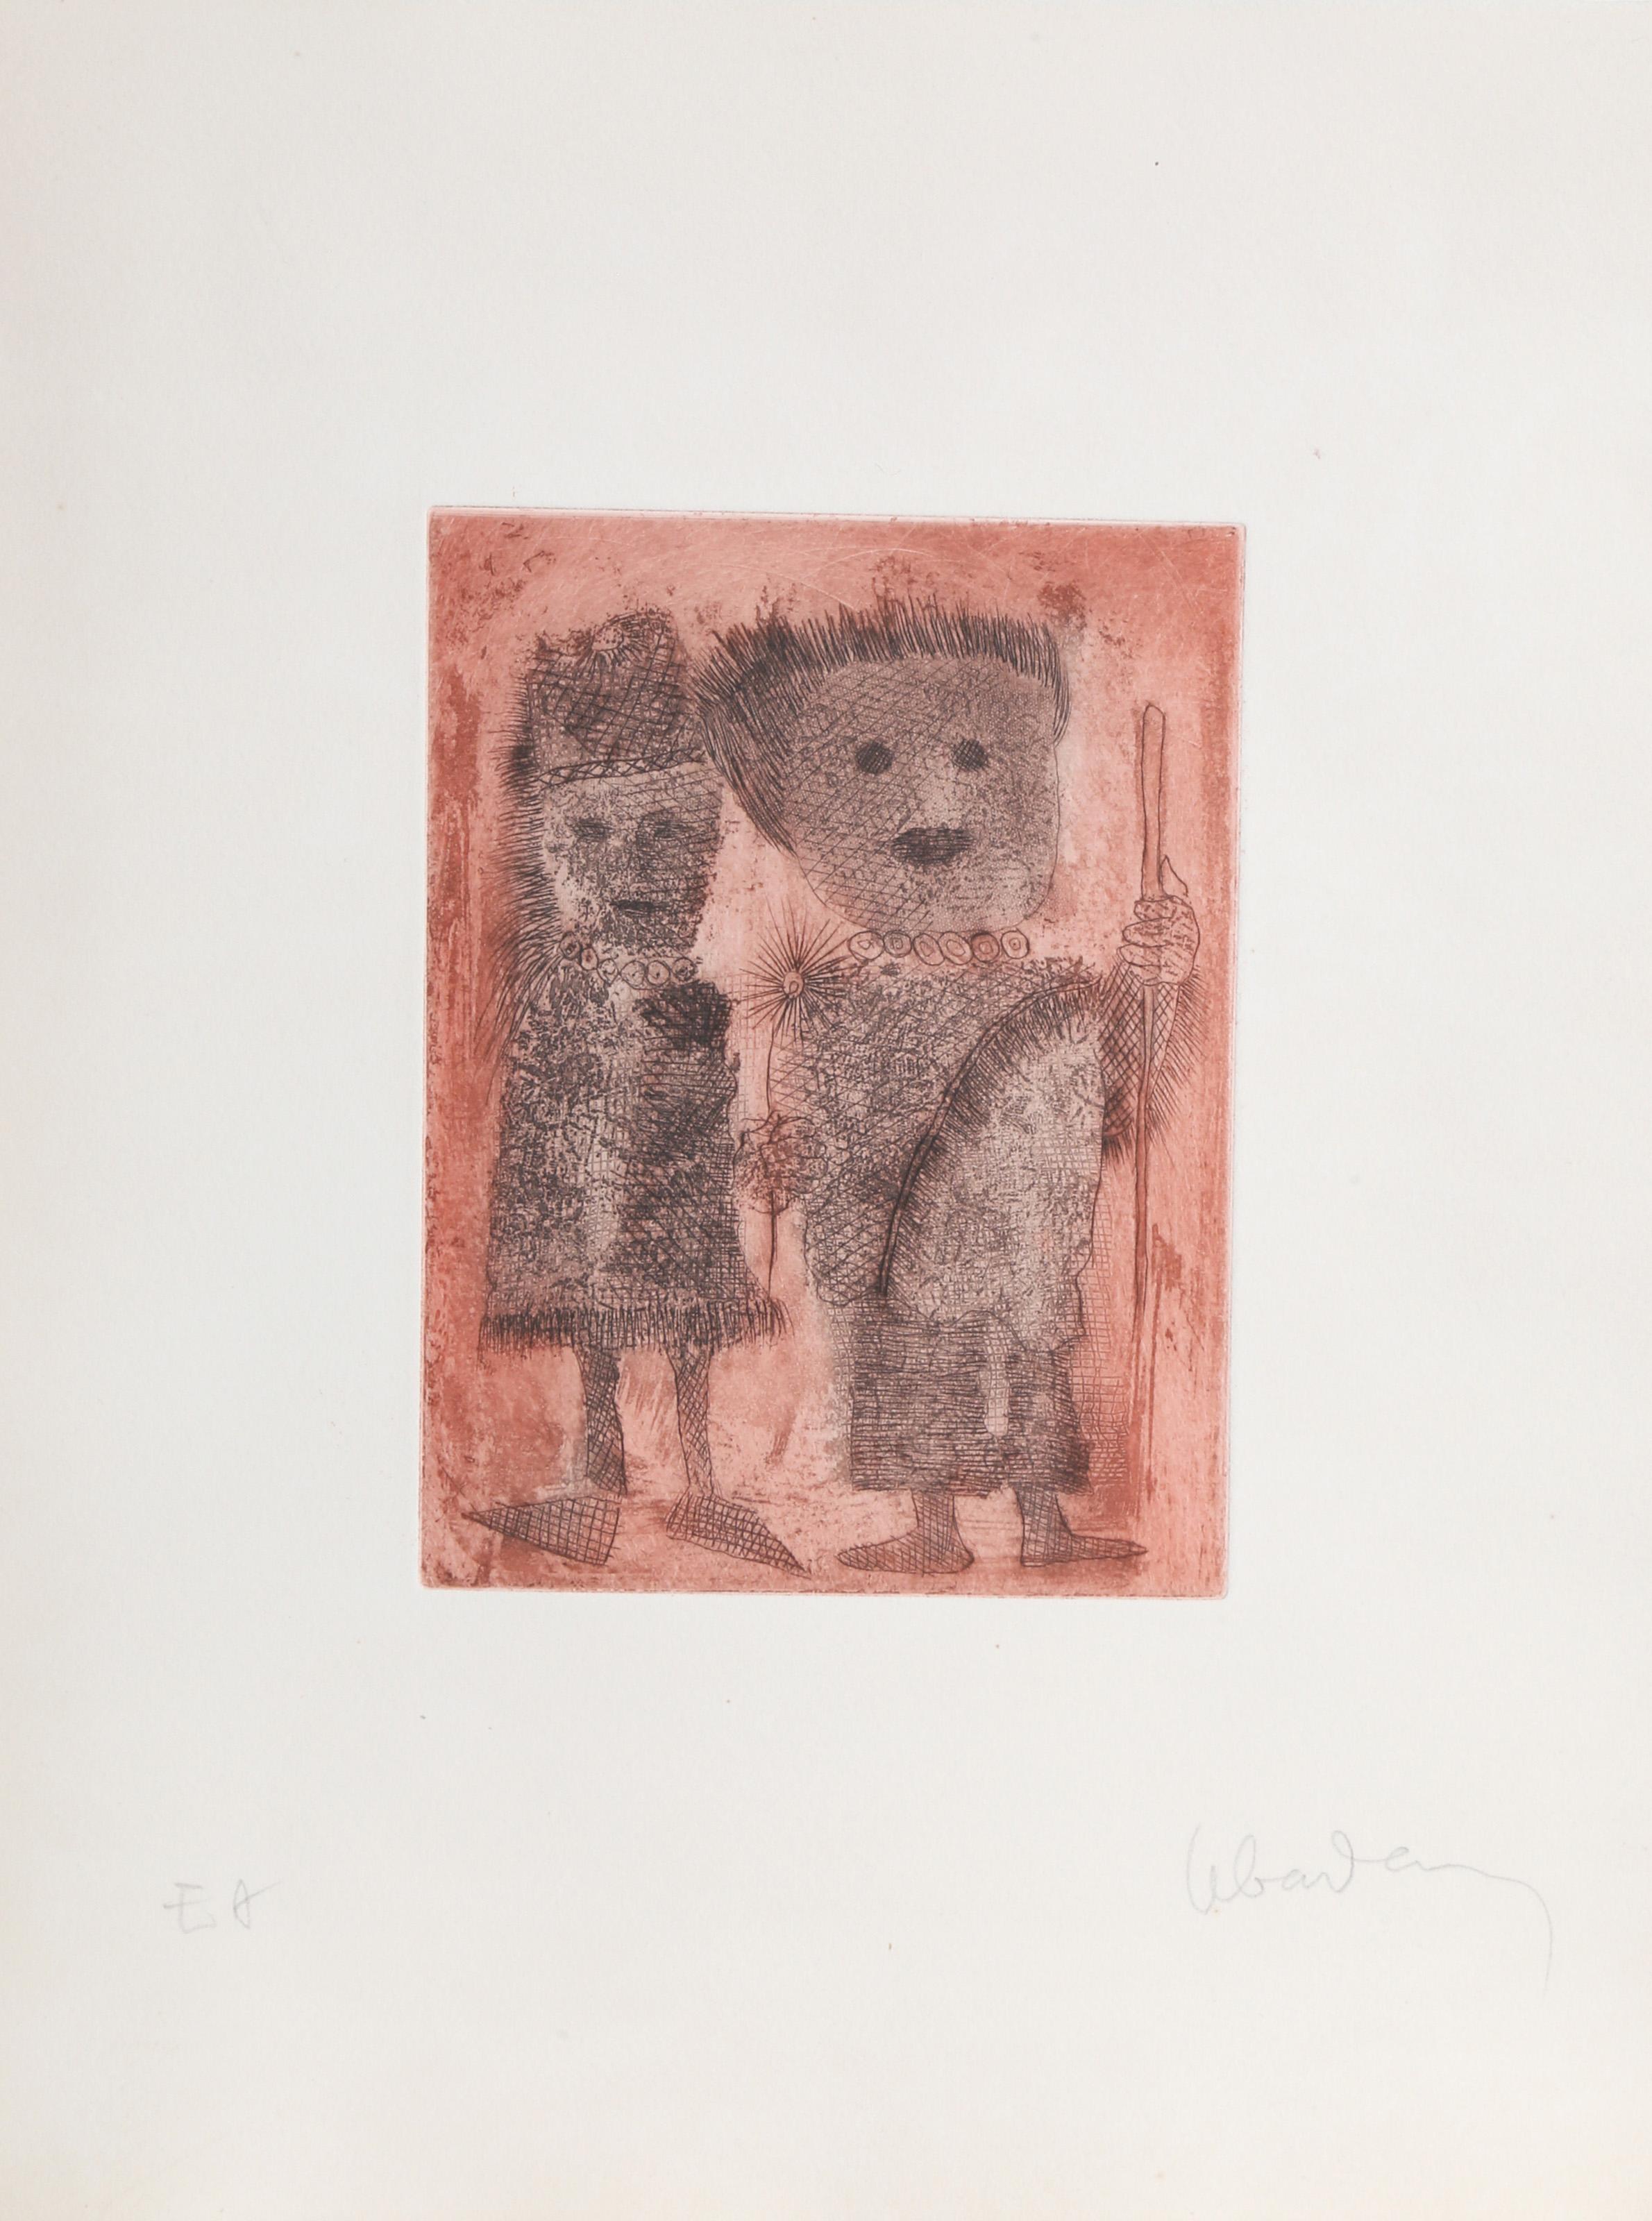 Lebadang (aka Hoi), Vietnamese (1922 - 2015) -  Couple Greeting with Flower (Red). Year: 1982, Medium: Etching with Relief, signed in pencil, Edition: EA, Size: 13  x 10 in. (33.02  x 25.4 cm) 